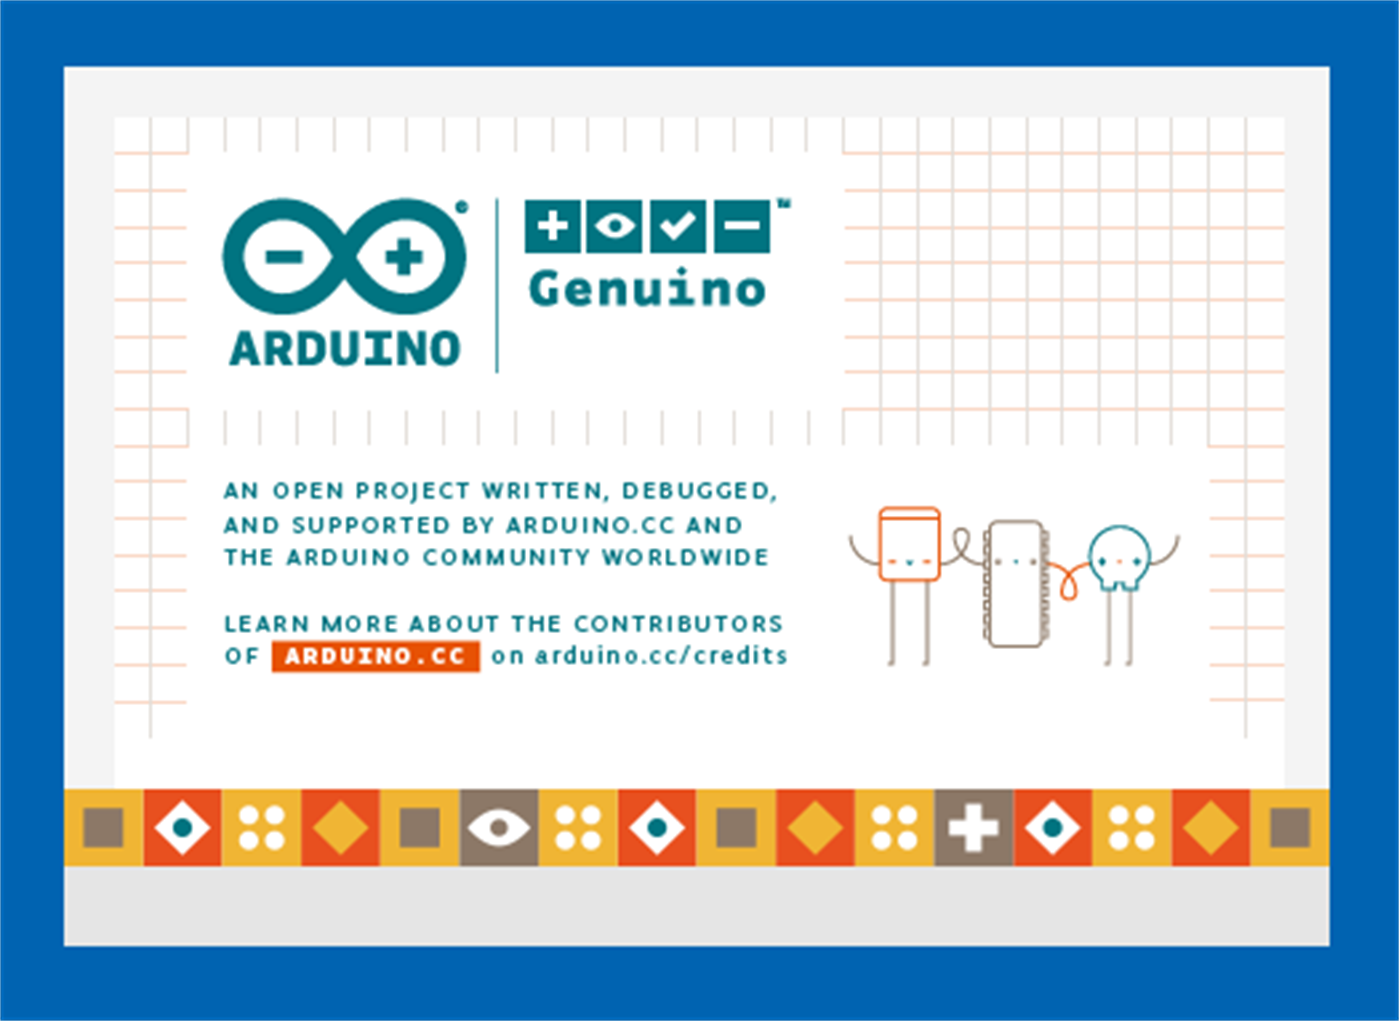 download arduino ide library